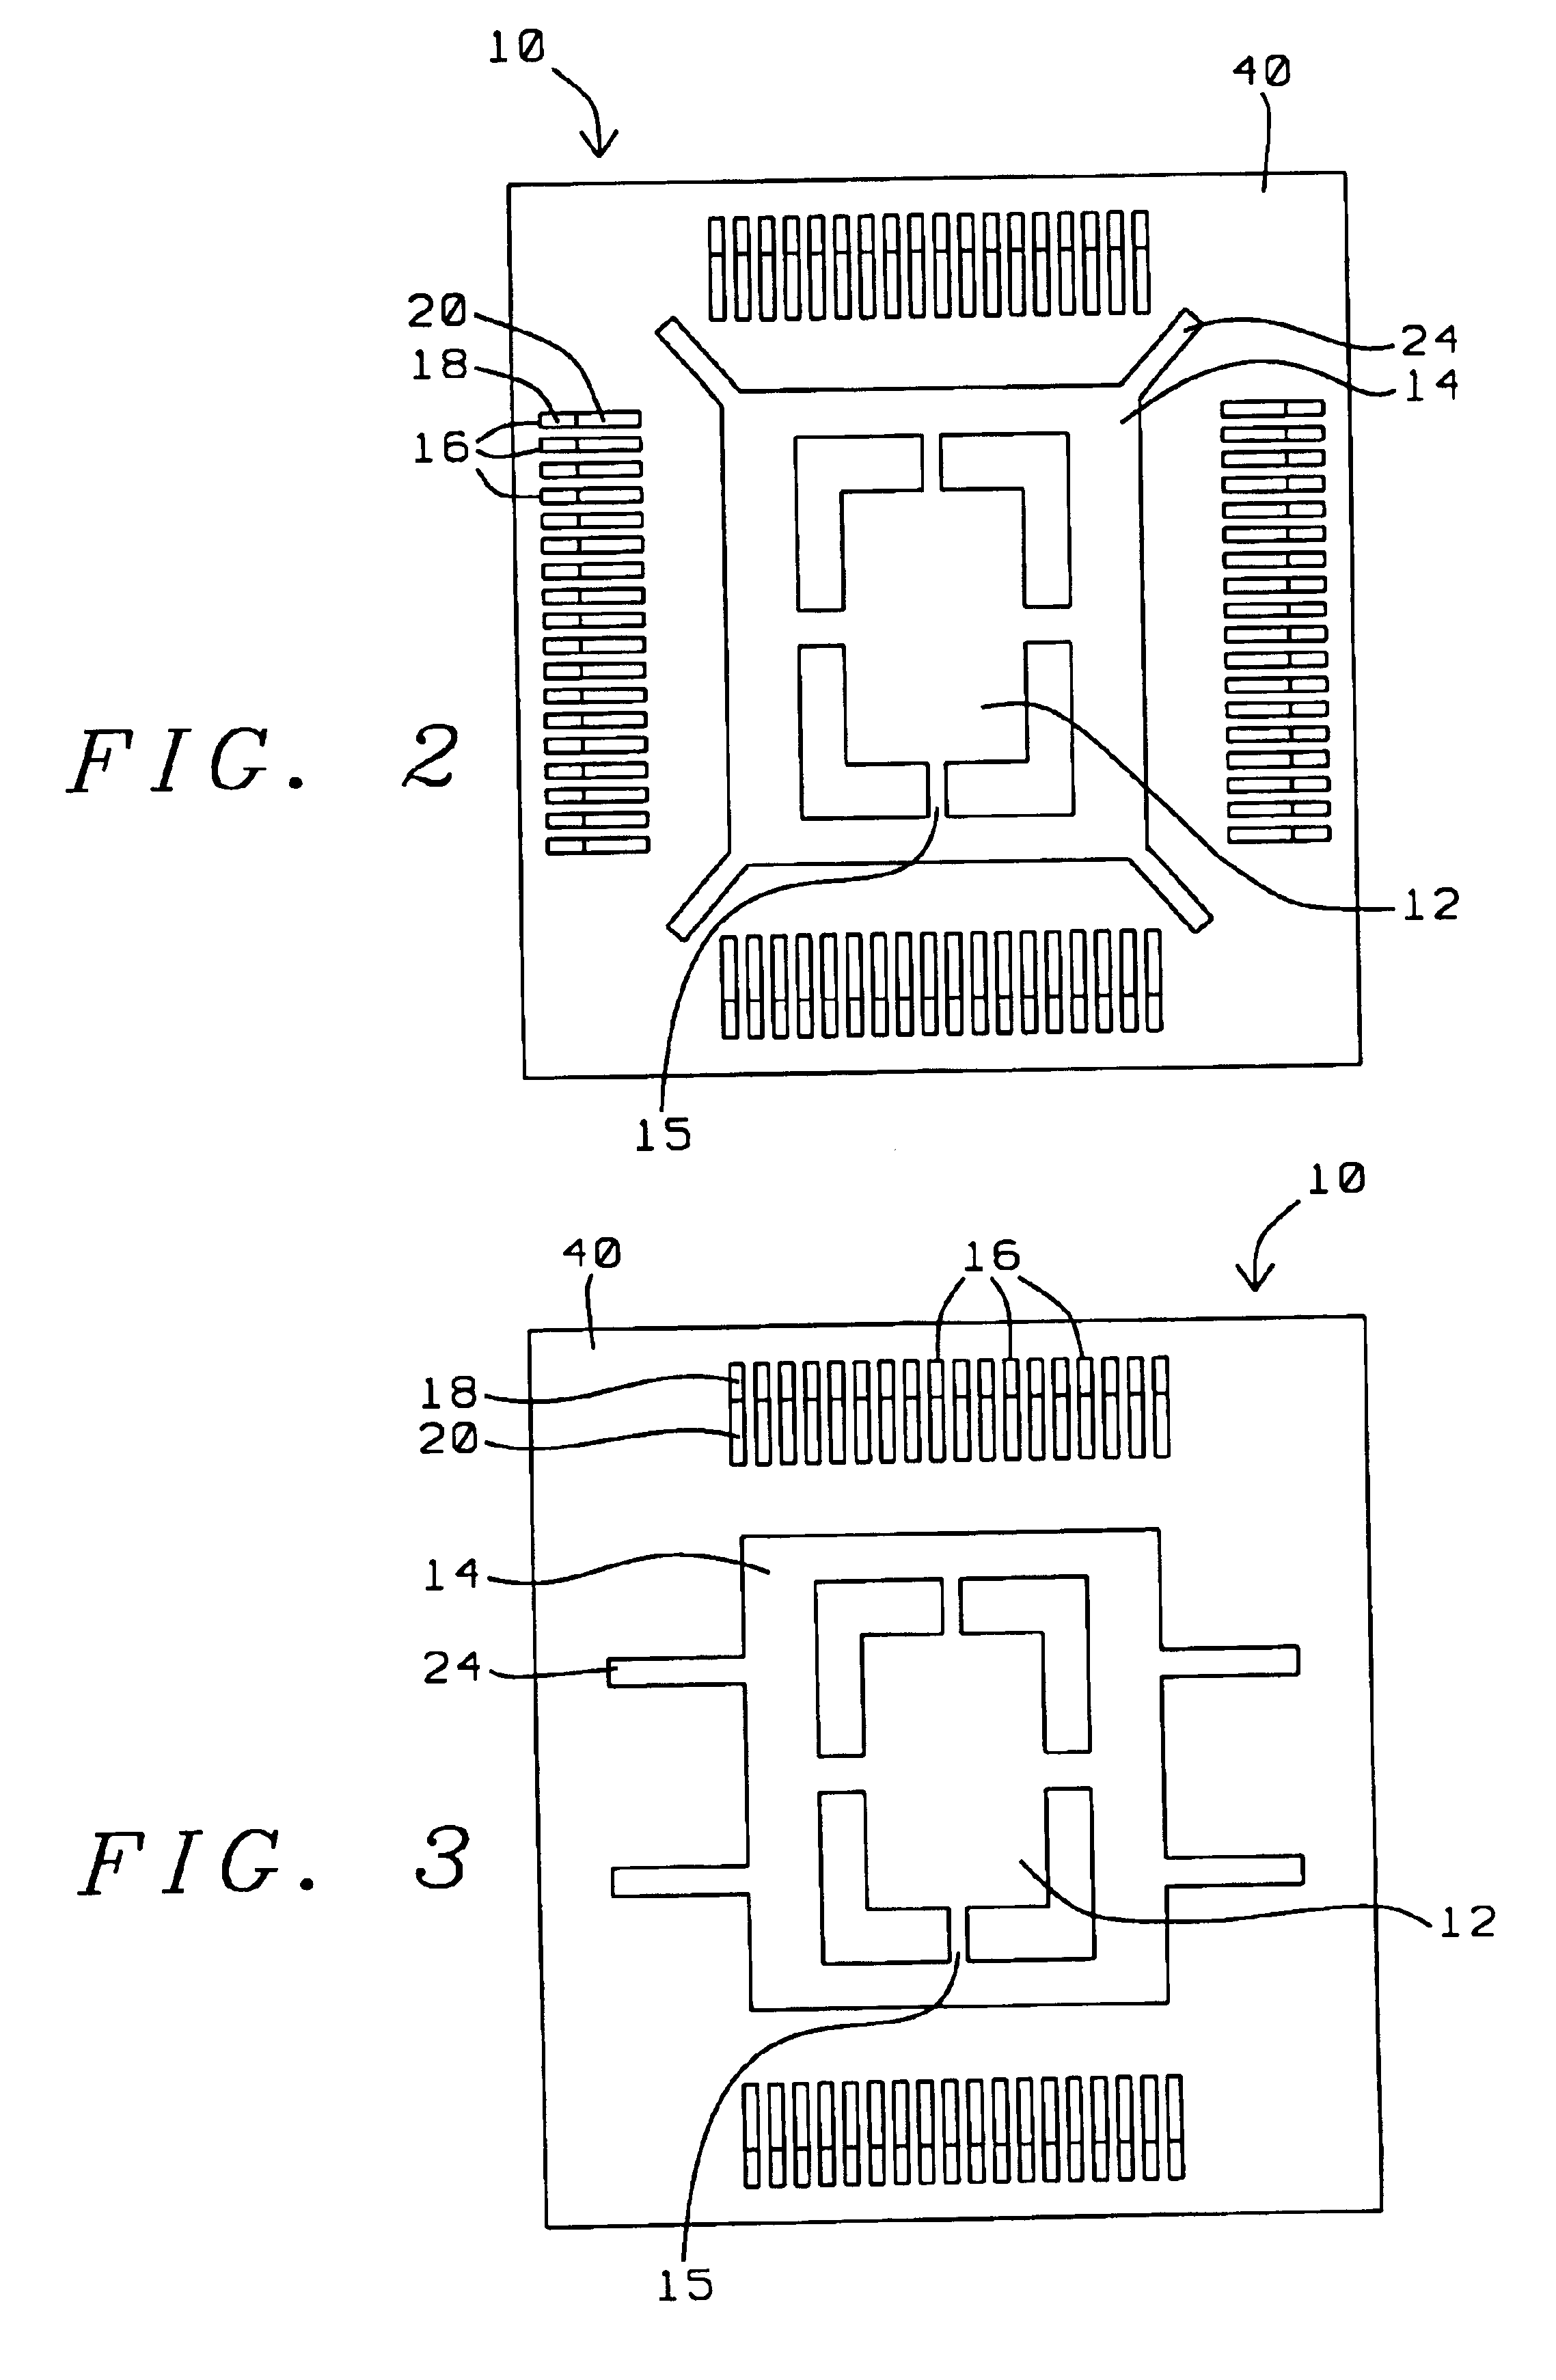 Leadframe for die stacking applications and related die stacking concepts